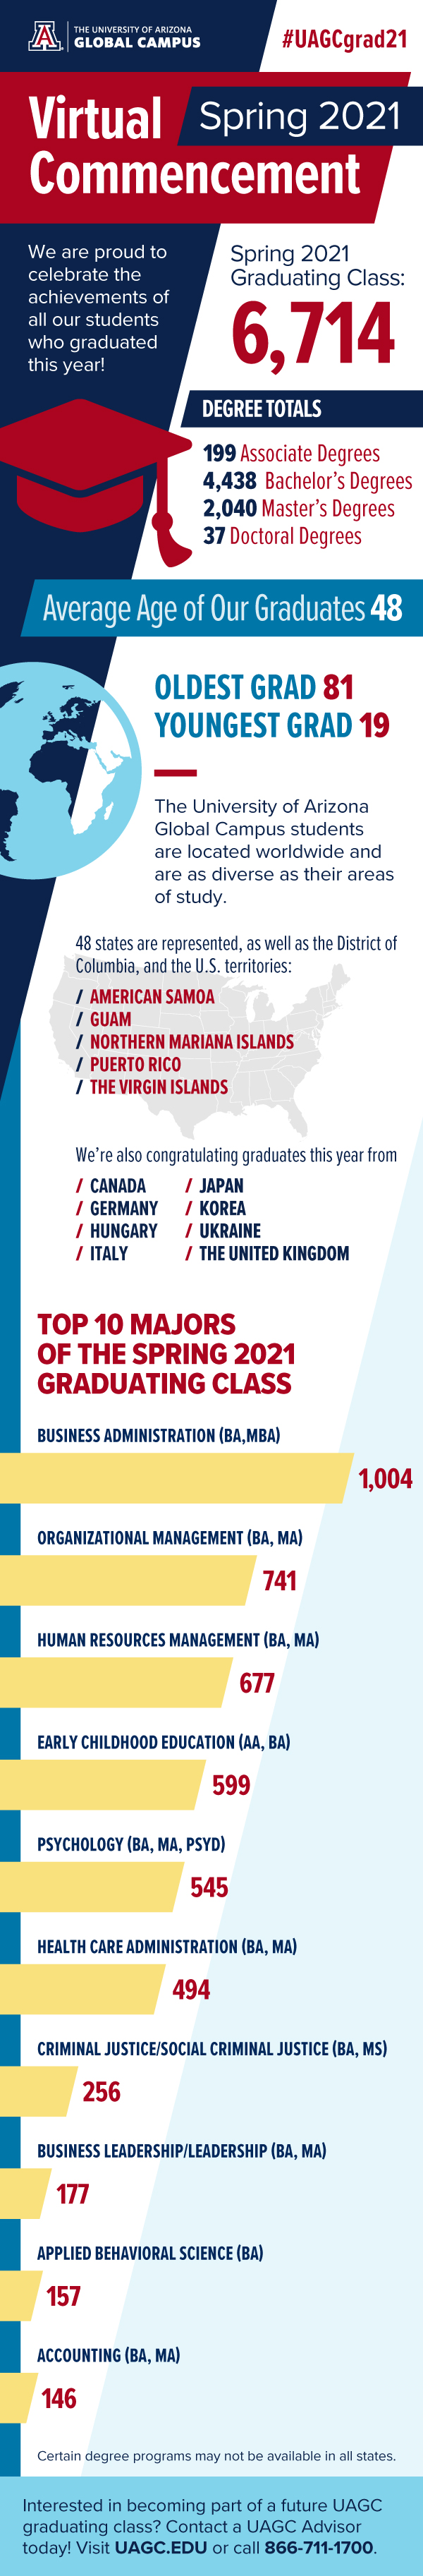 uagc spring 2021 commencement by the numbers infographic